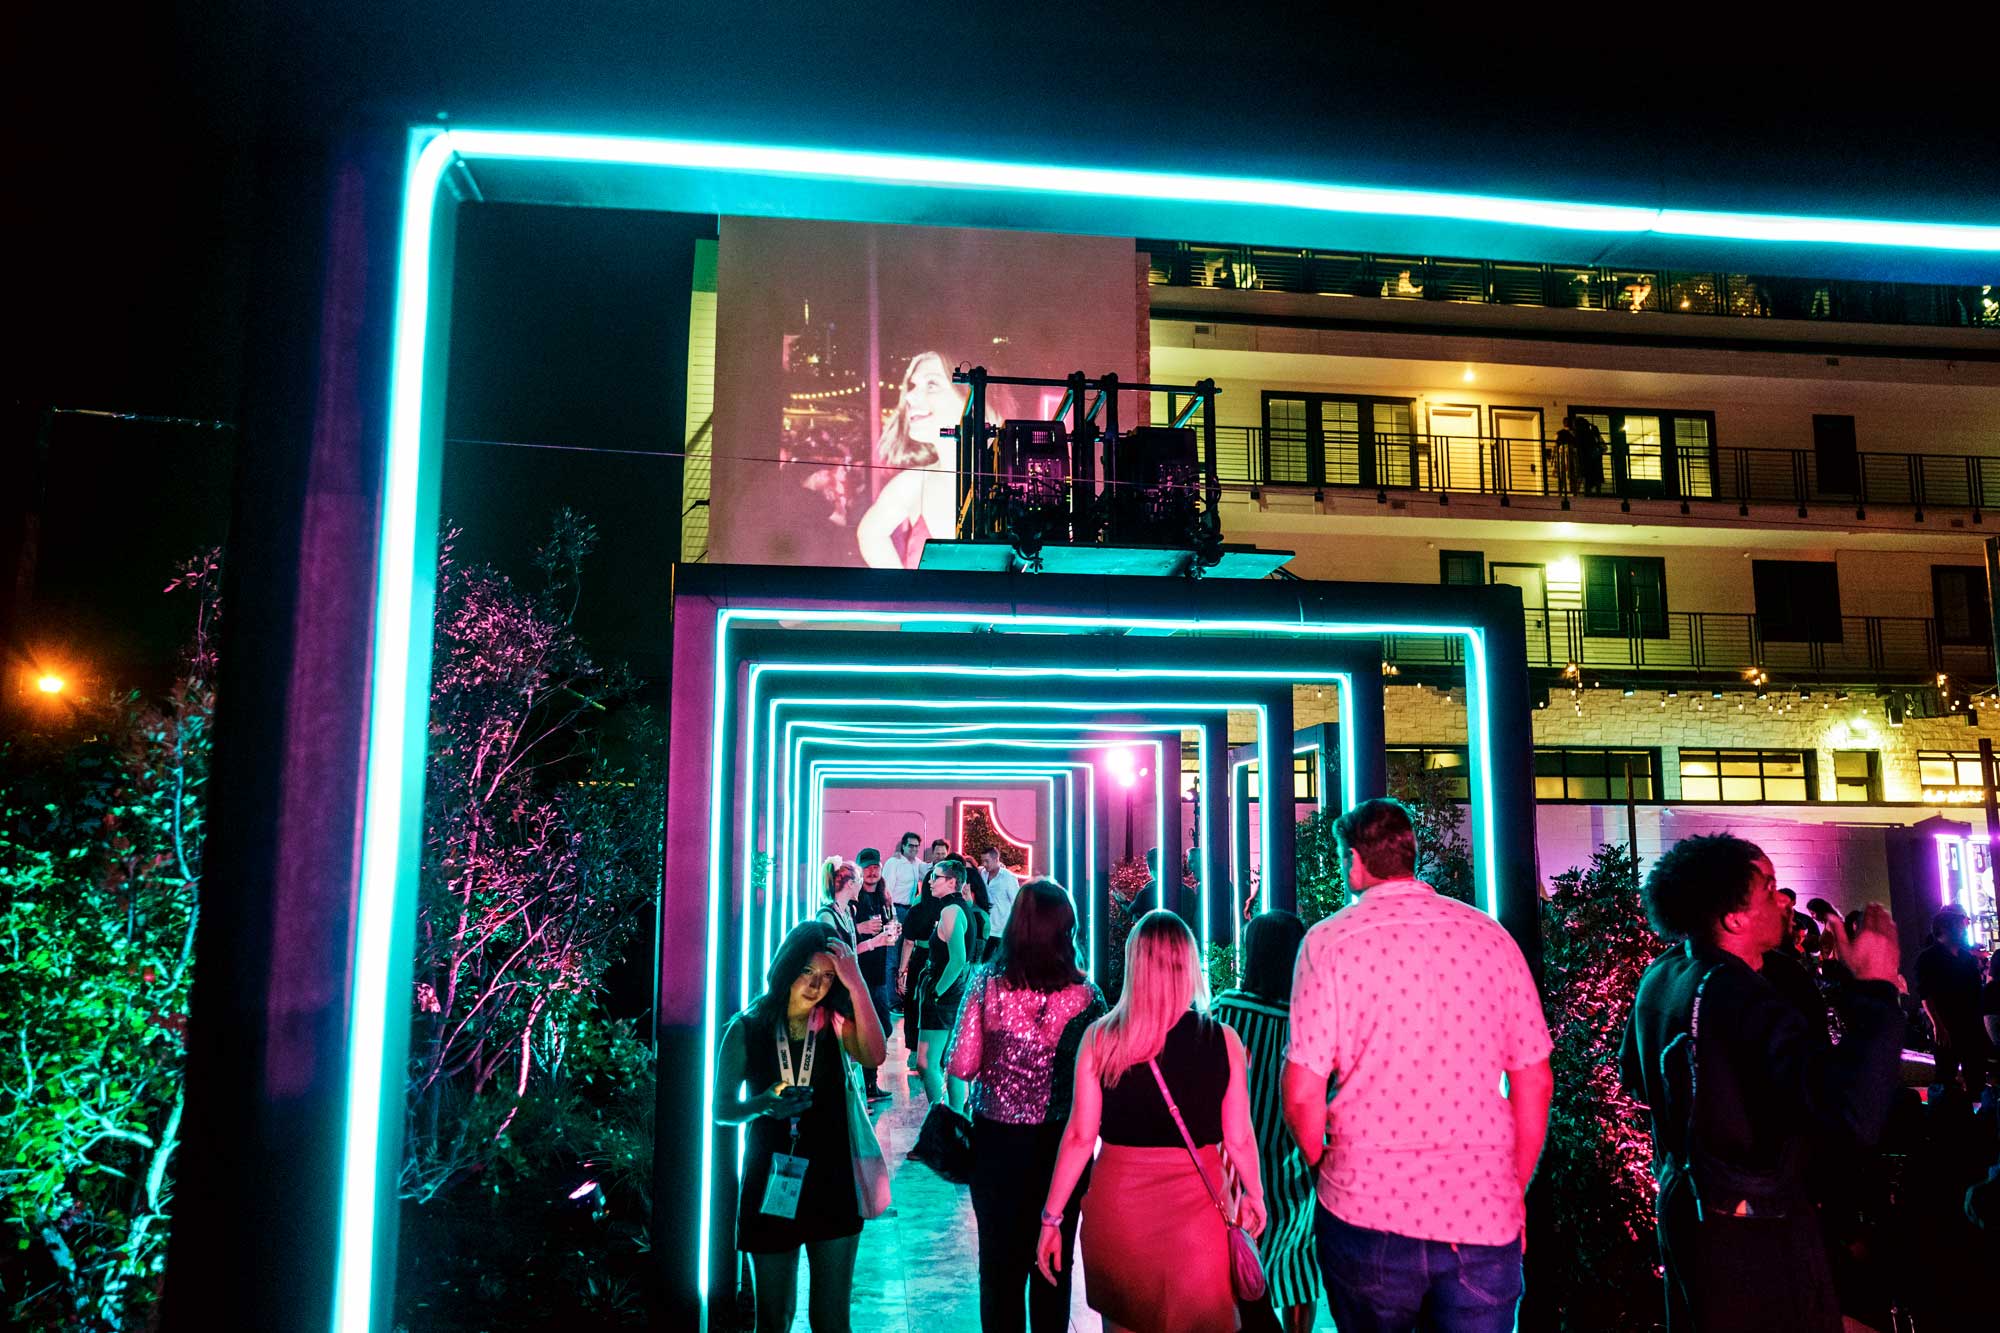 an Immersive Brand experience for TikTok at SXSW